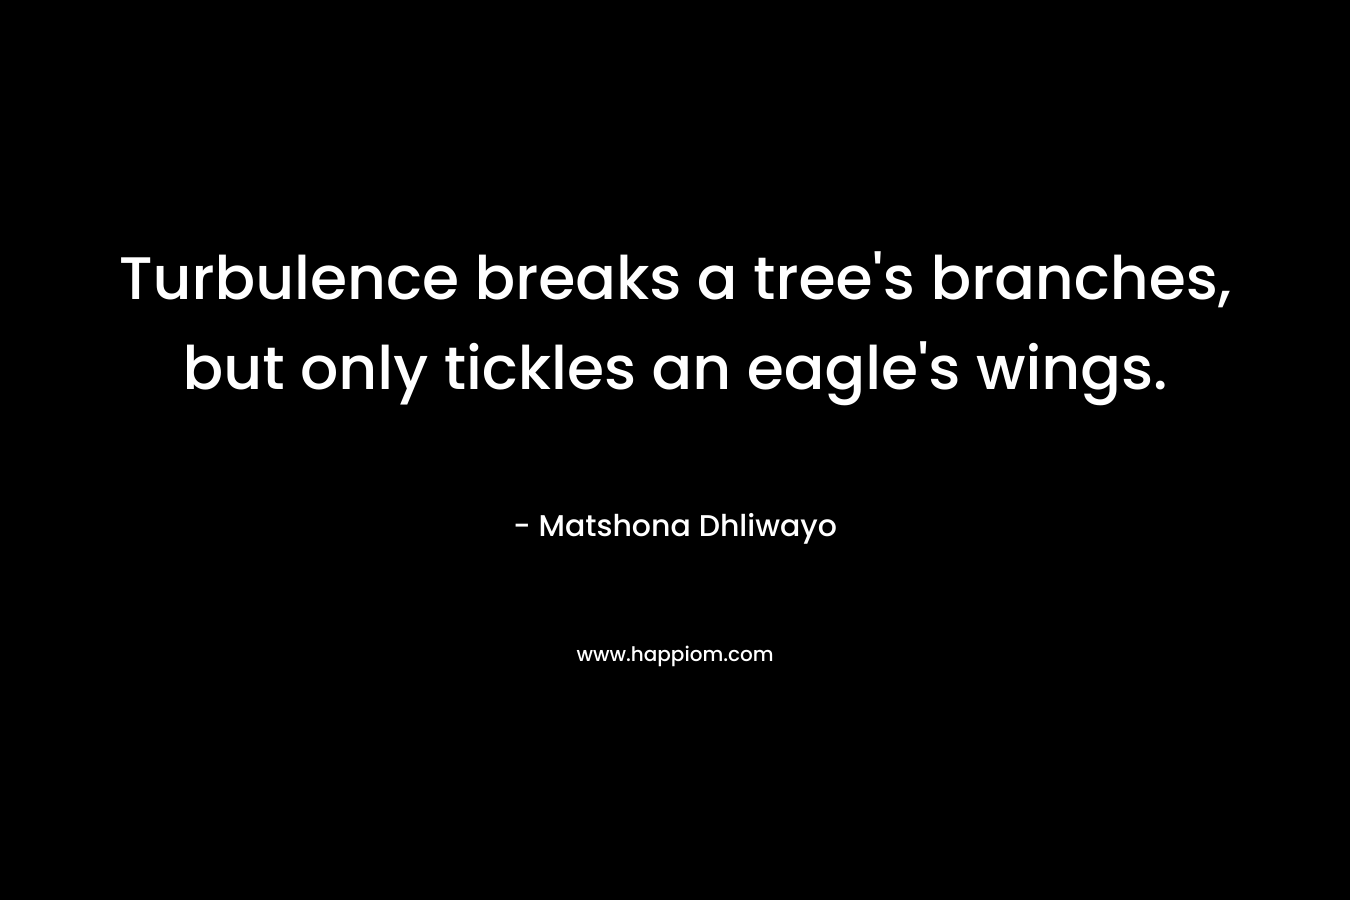 Turbulence breaks a tree’s branches, but only tickles an eagle’s wings. – Matshona Dhliwayo